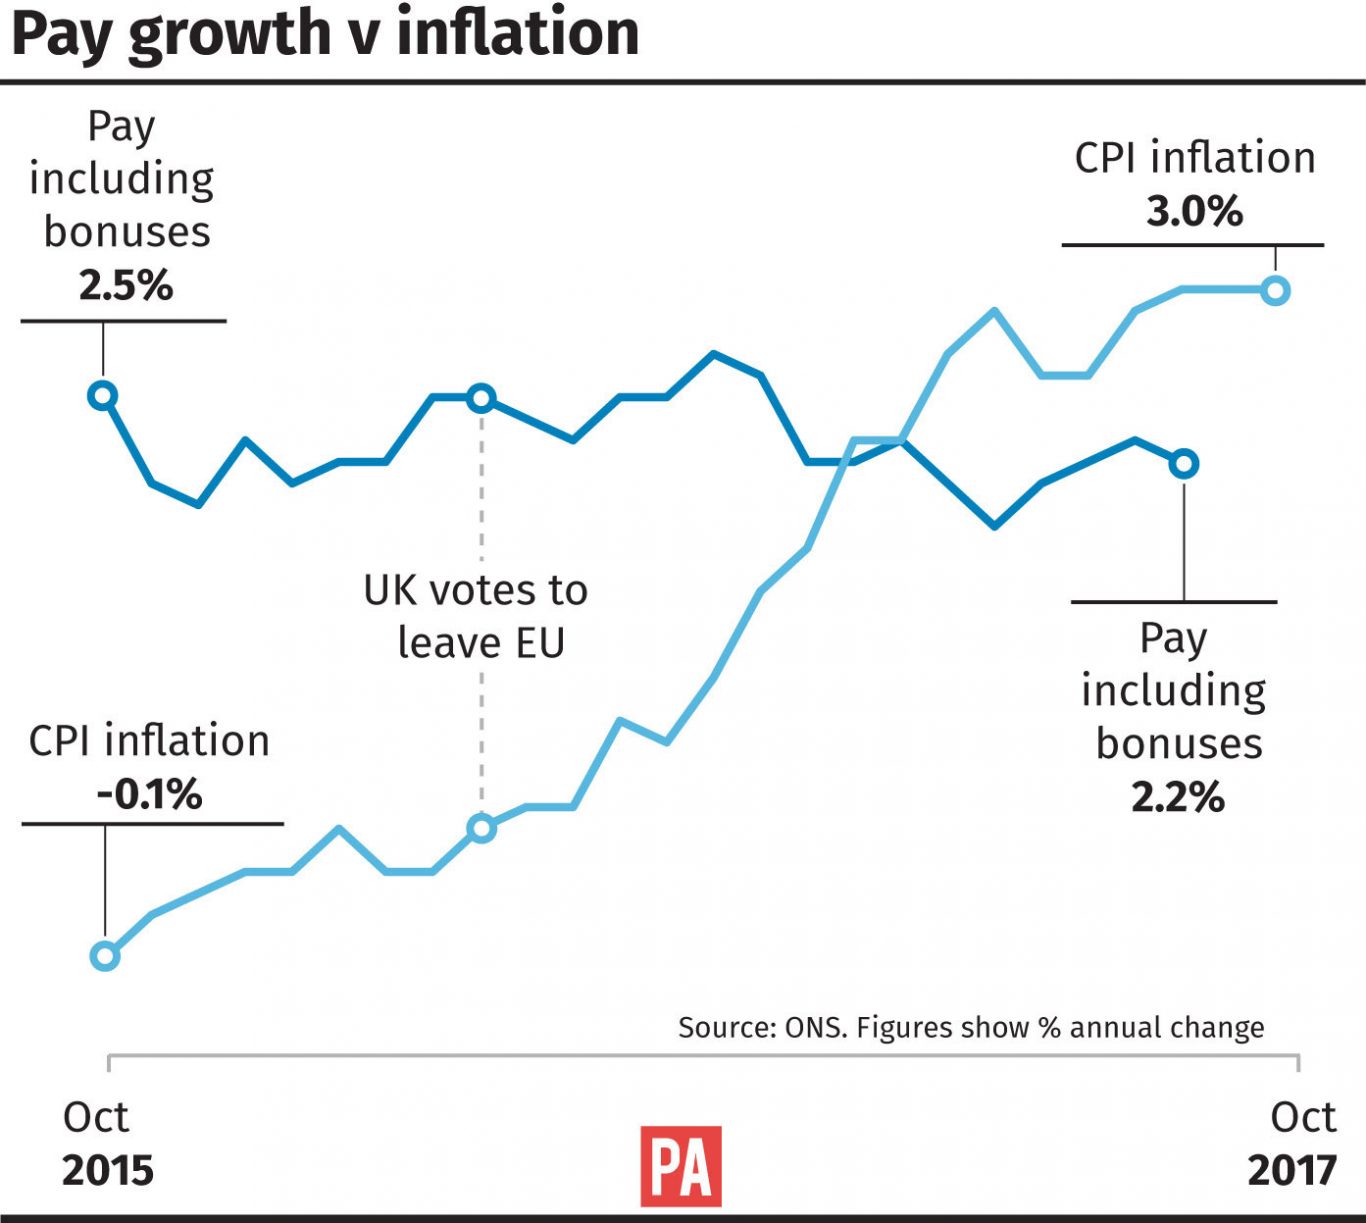 Pay growth v inflation 